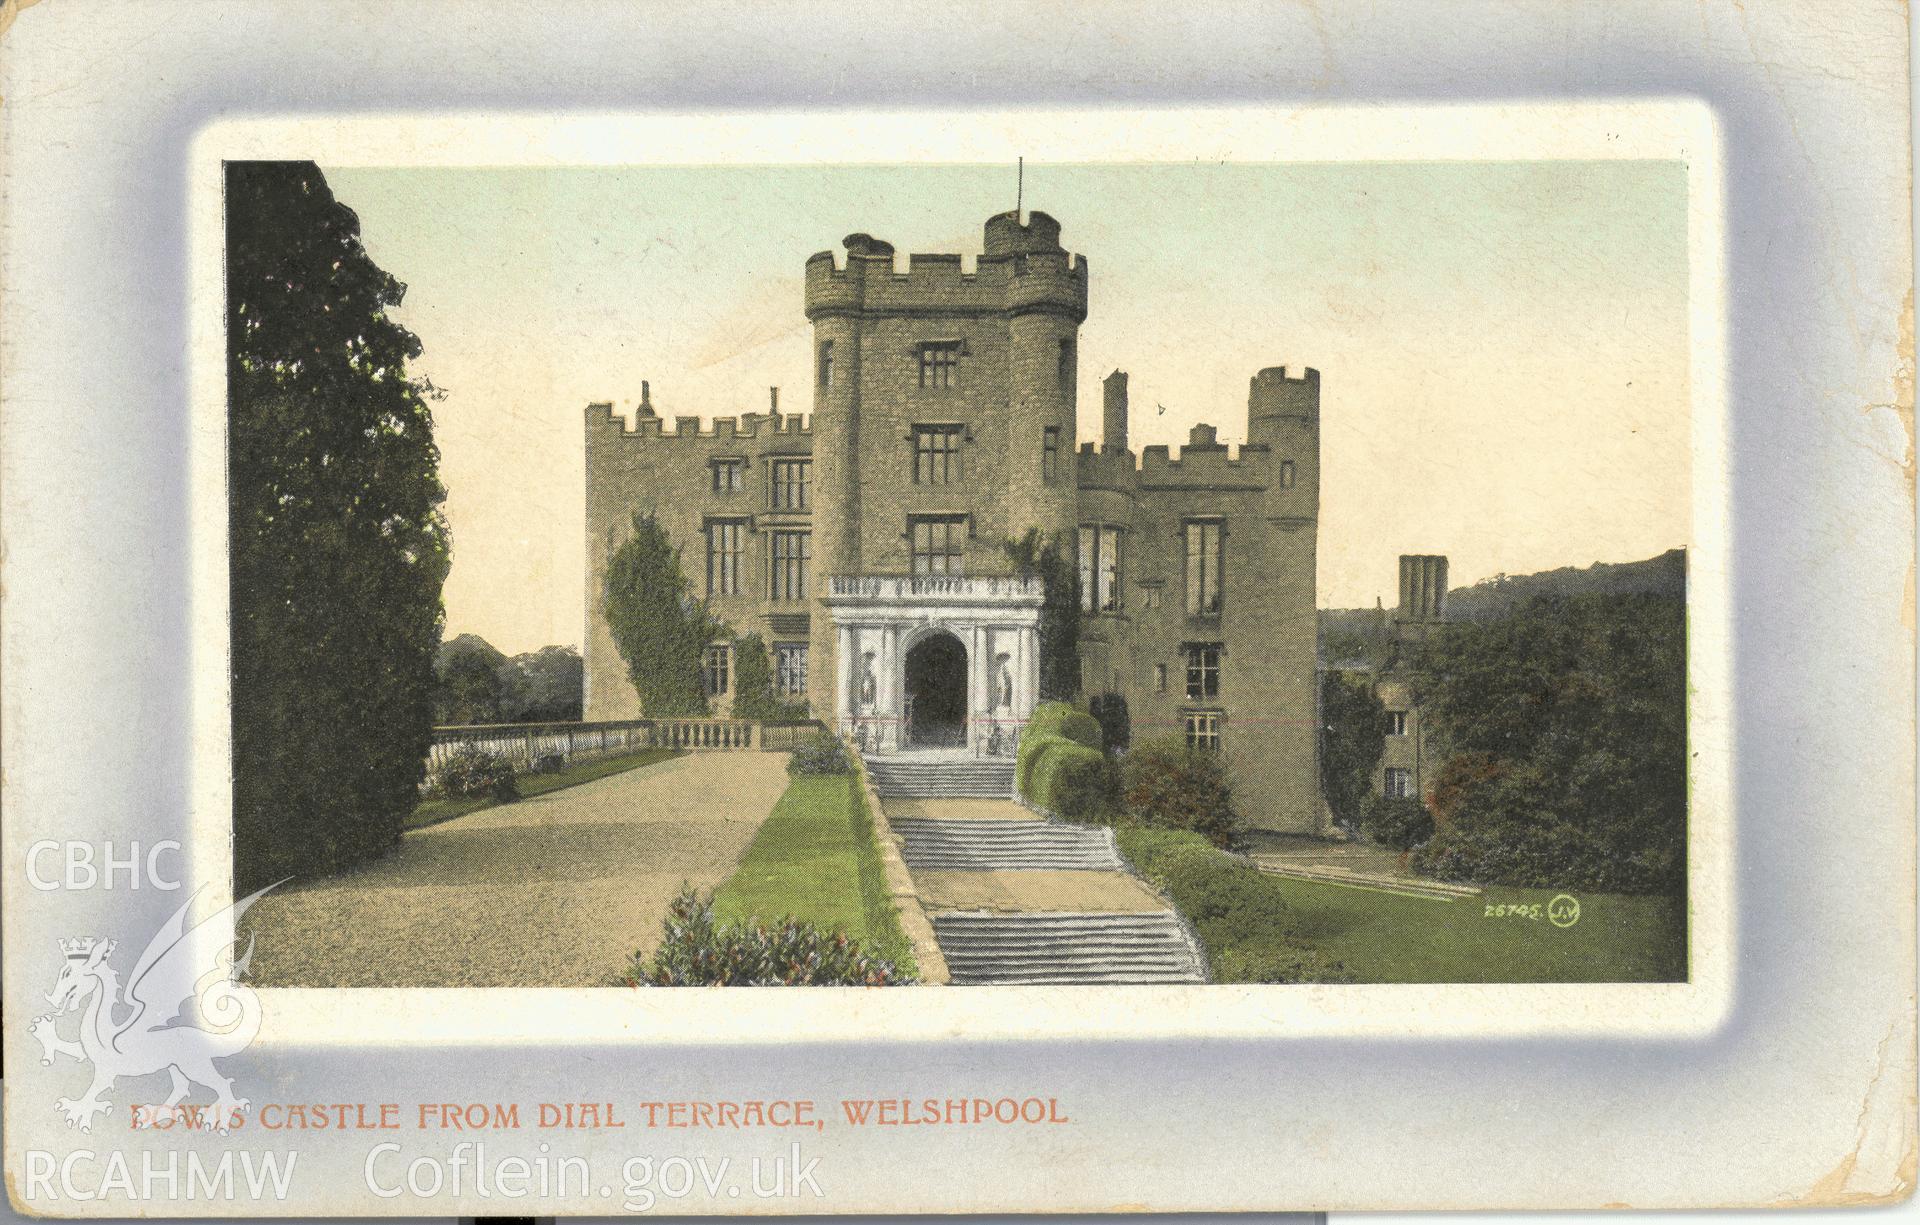 Digitised postcard image of Powis Castle showing Sundial Terrace, Valentines Series. Produced by Parks and Gardens Data Services, from an original item in the Peter Davis Collection at Parks and Gardens UK. We hold only web-resolution images of this collection, suitable for viewing on screen and for research purposes only. We do not hold the original images, or publication quality scans.